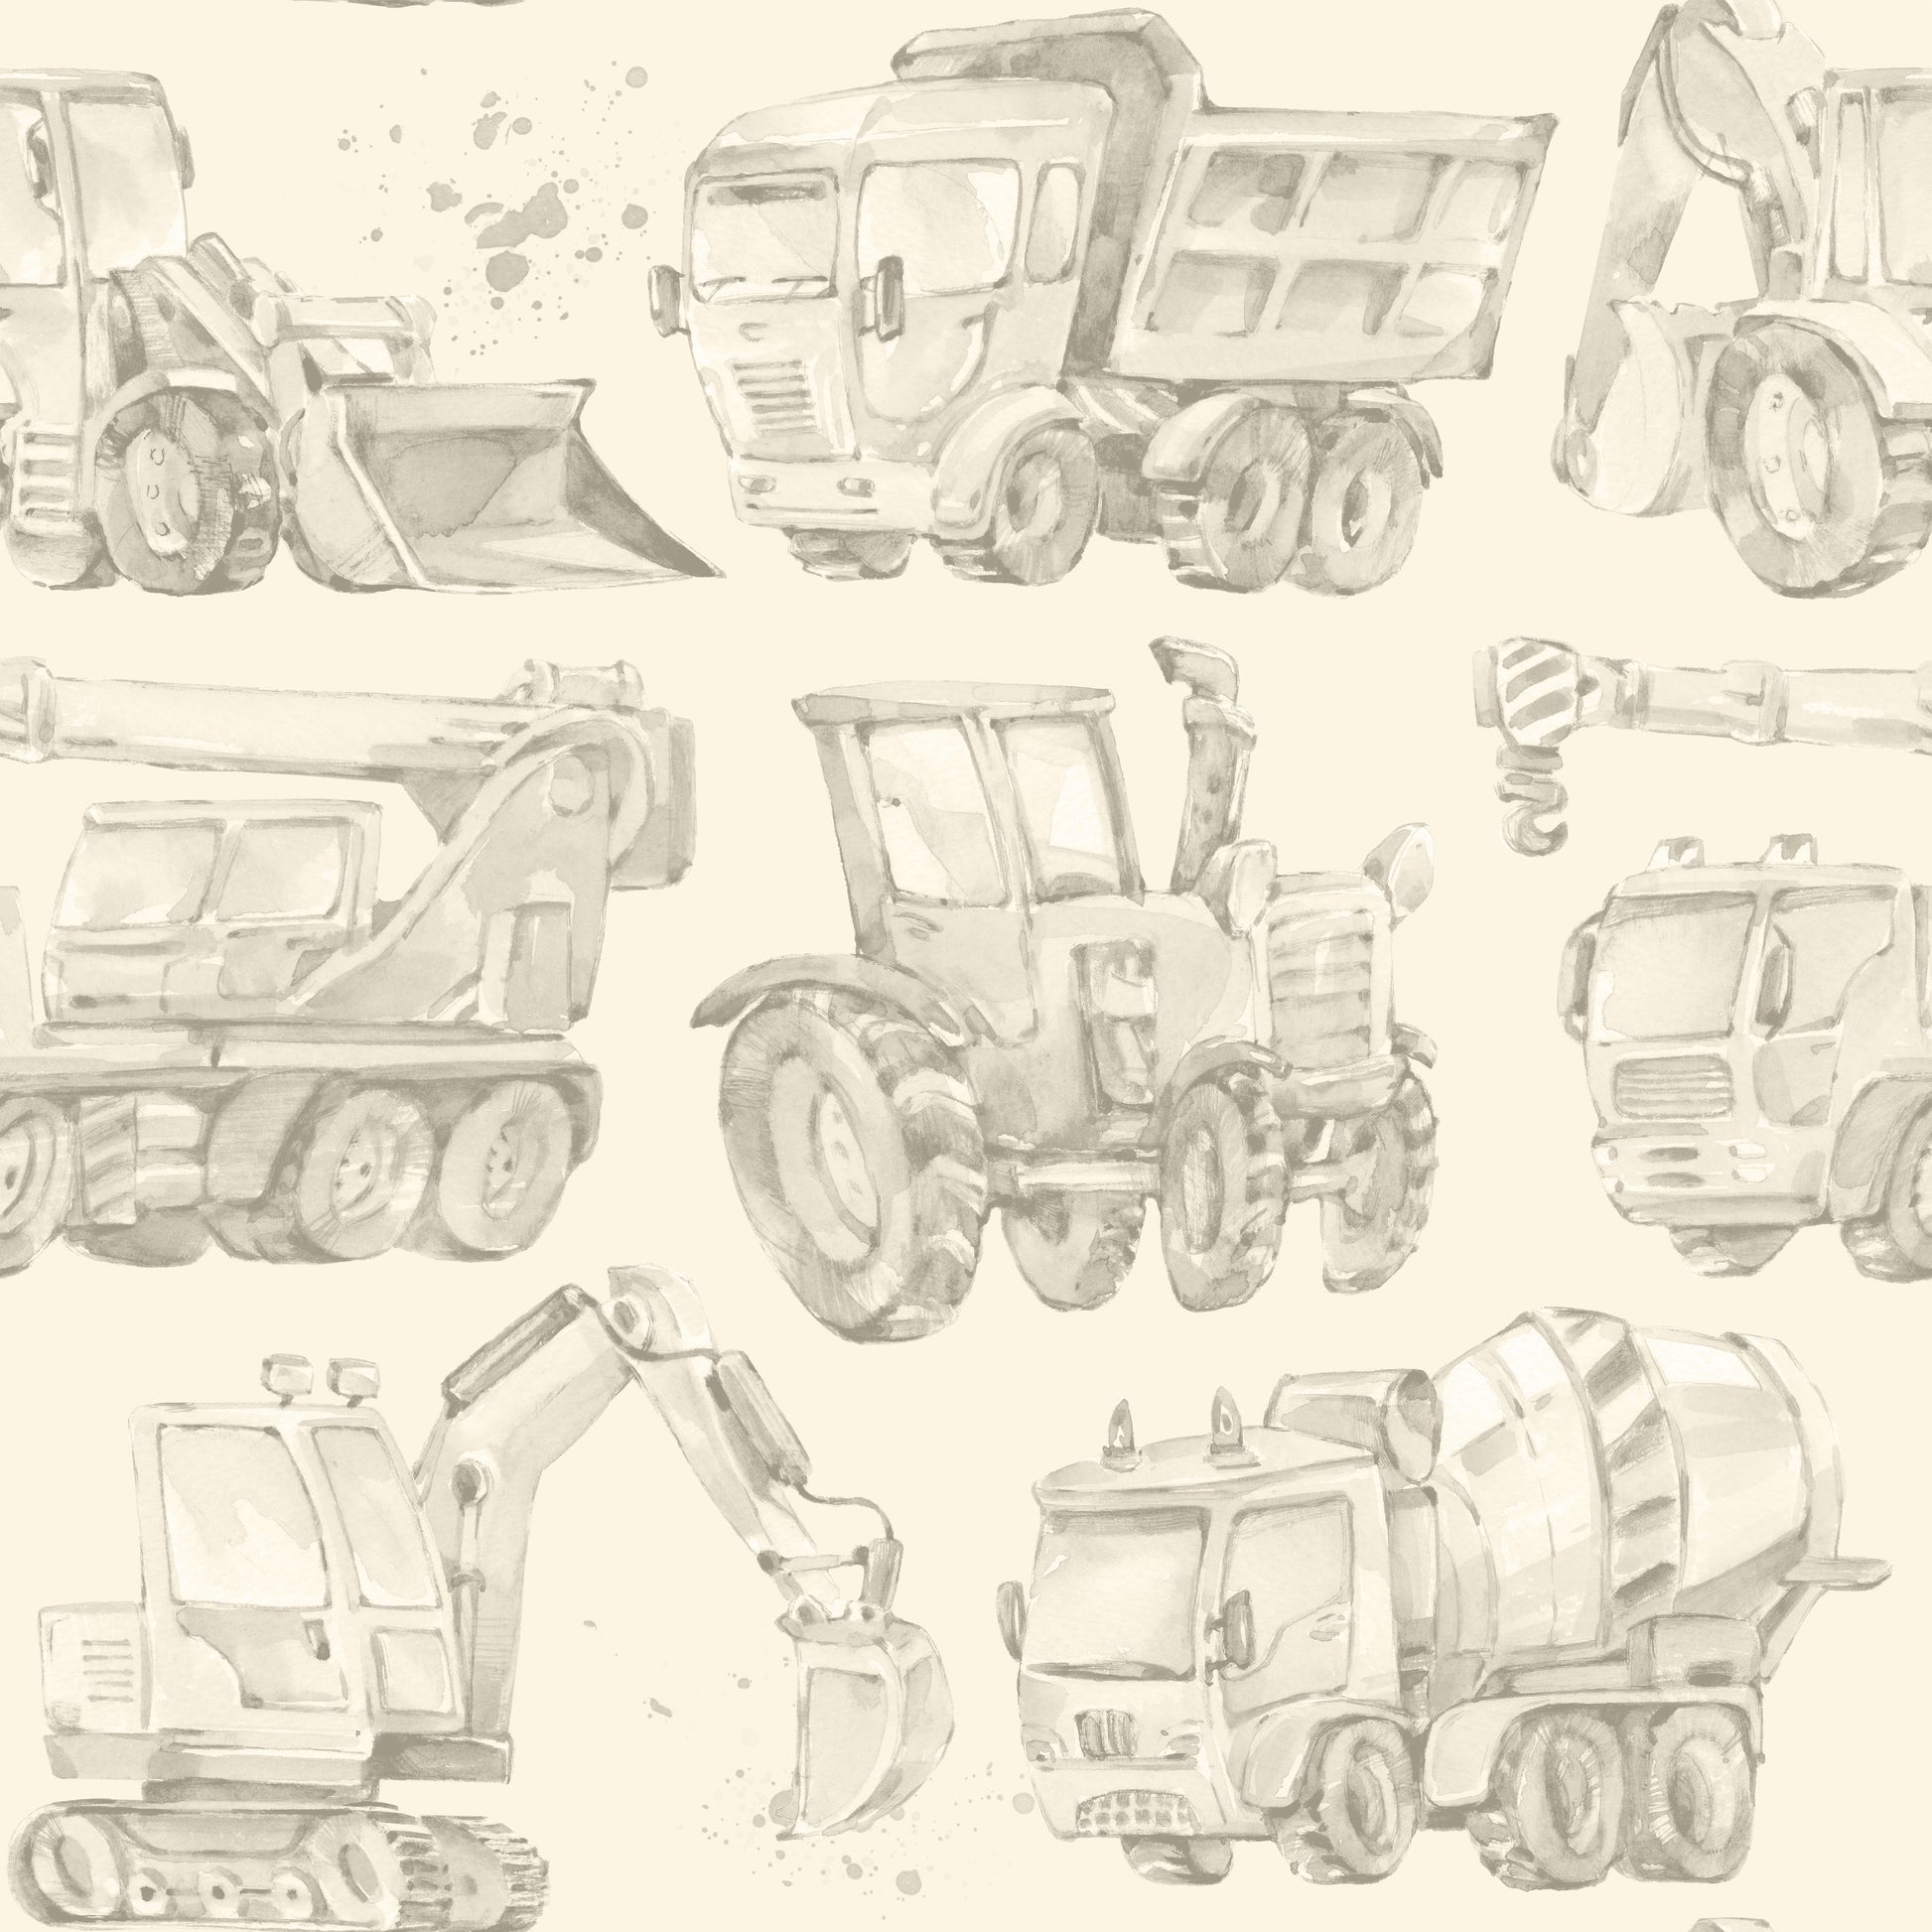 Wallpaper sample pattern up close featuring cars, trucks, Diggers, and Dump Trucks in a neutral color scheme